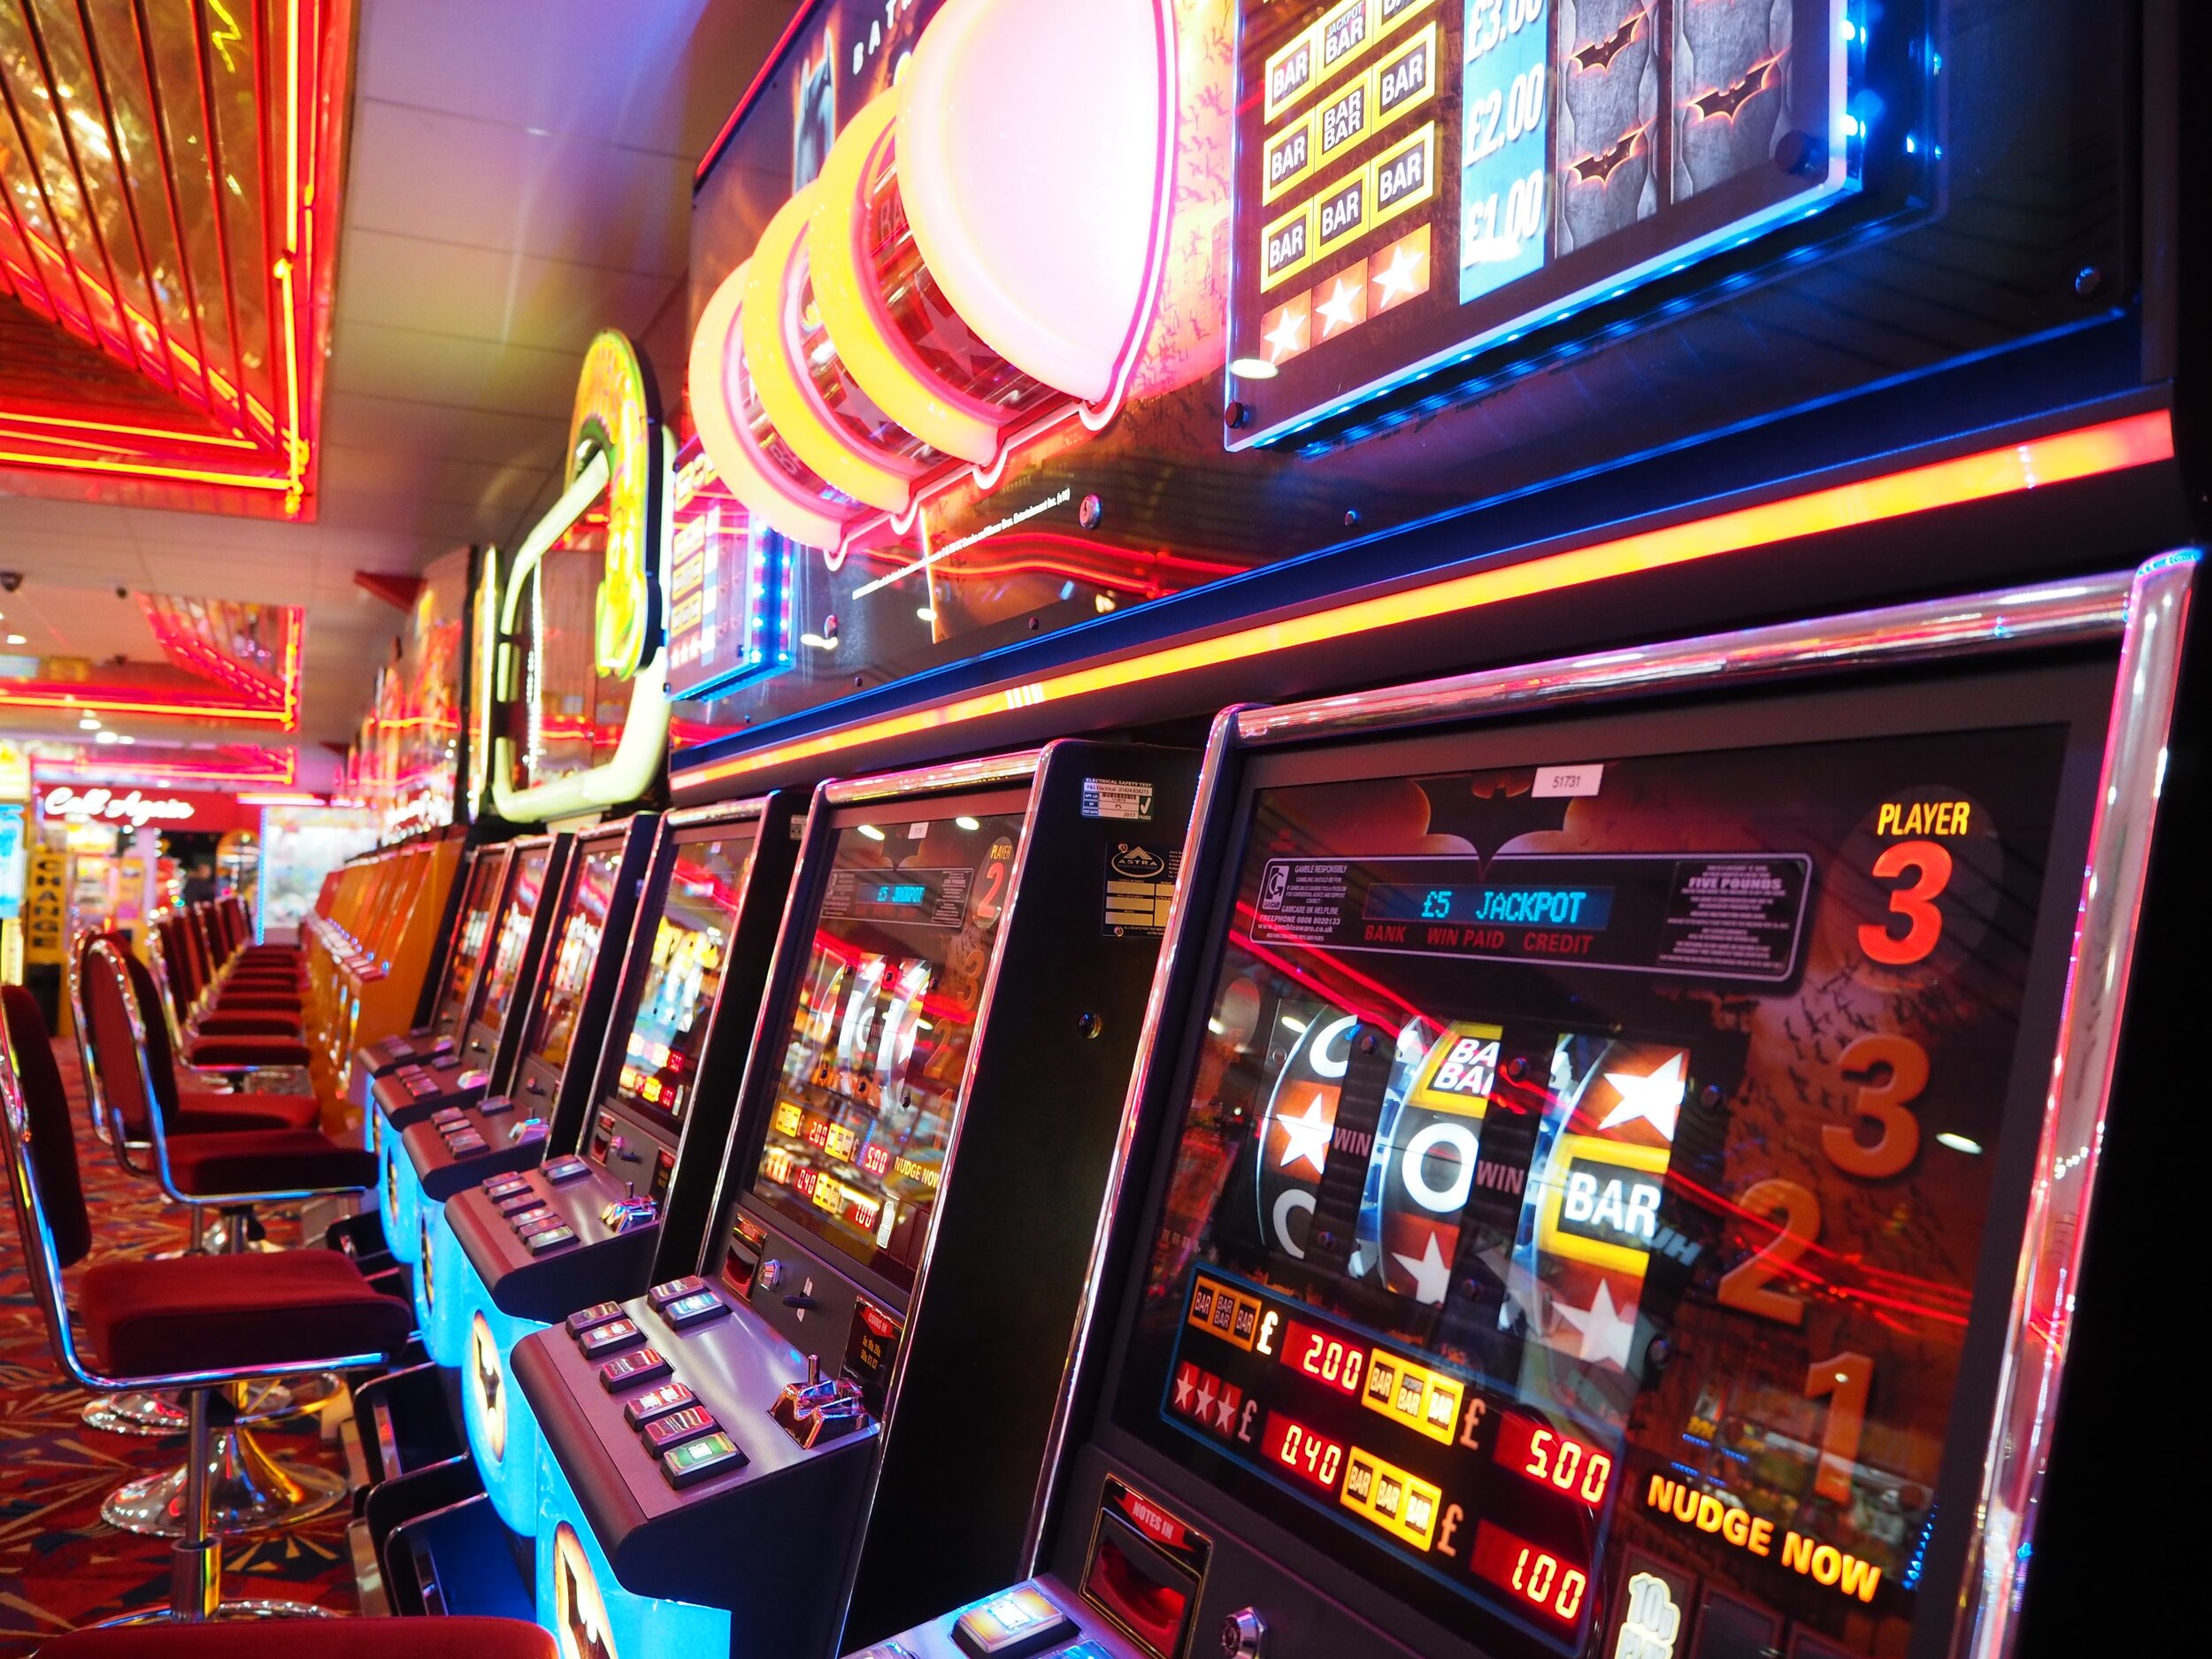 Slot Machines: Legal or Not in Canada? — Every Movie Has a Lesson